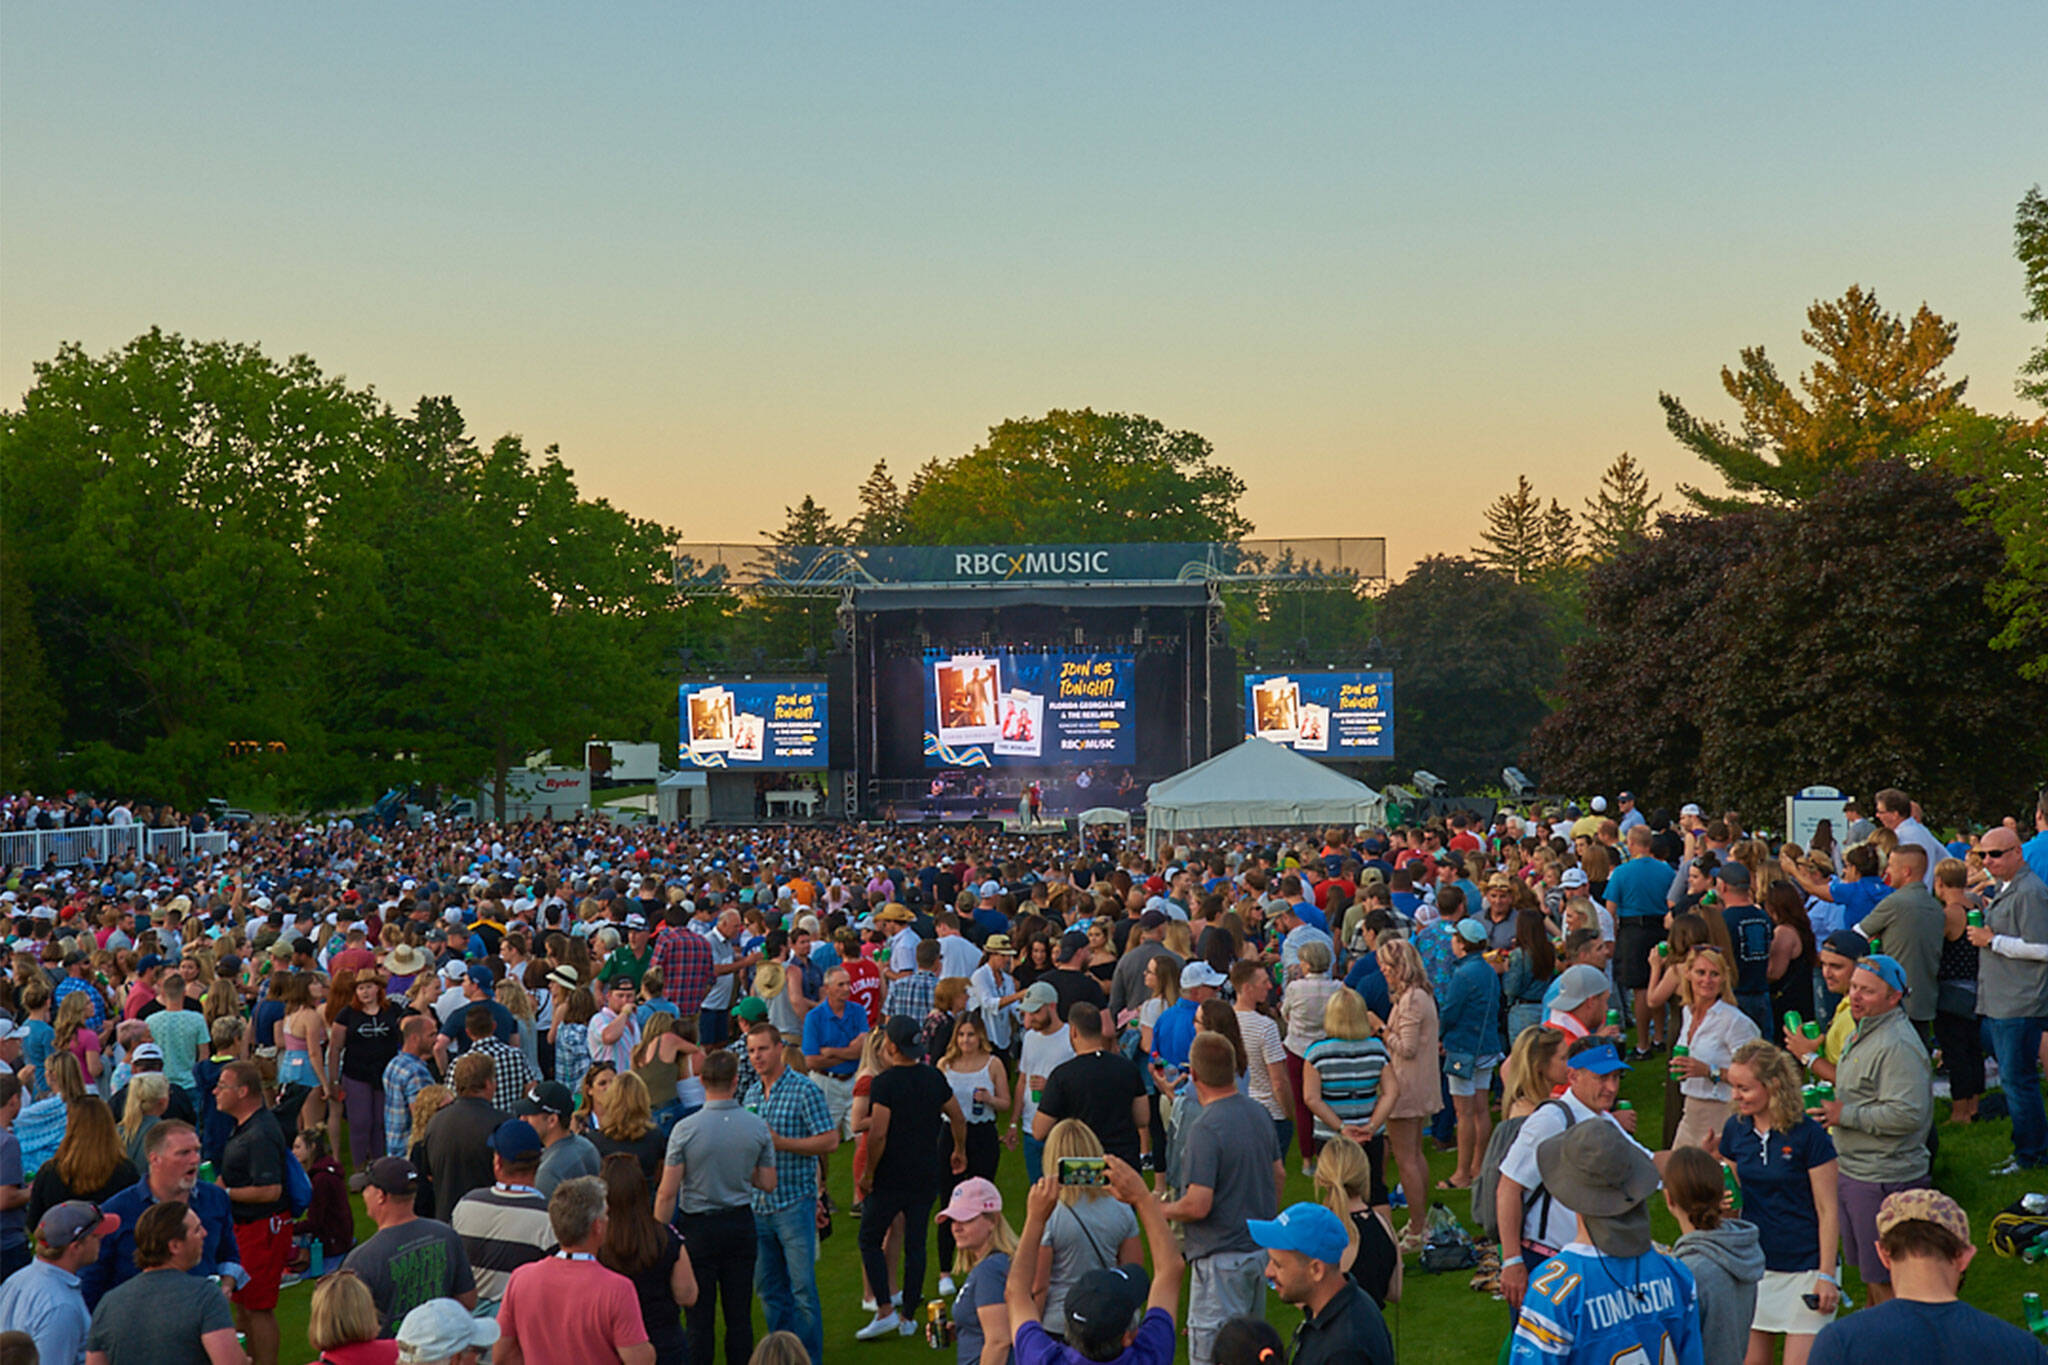 Enter for a chance to meet Maroon 5 or Flo Rida at the RBC Canadian Open